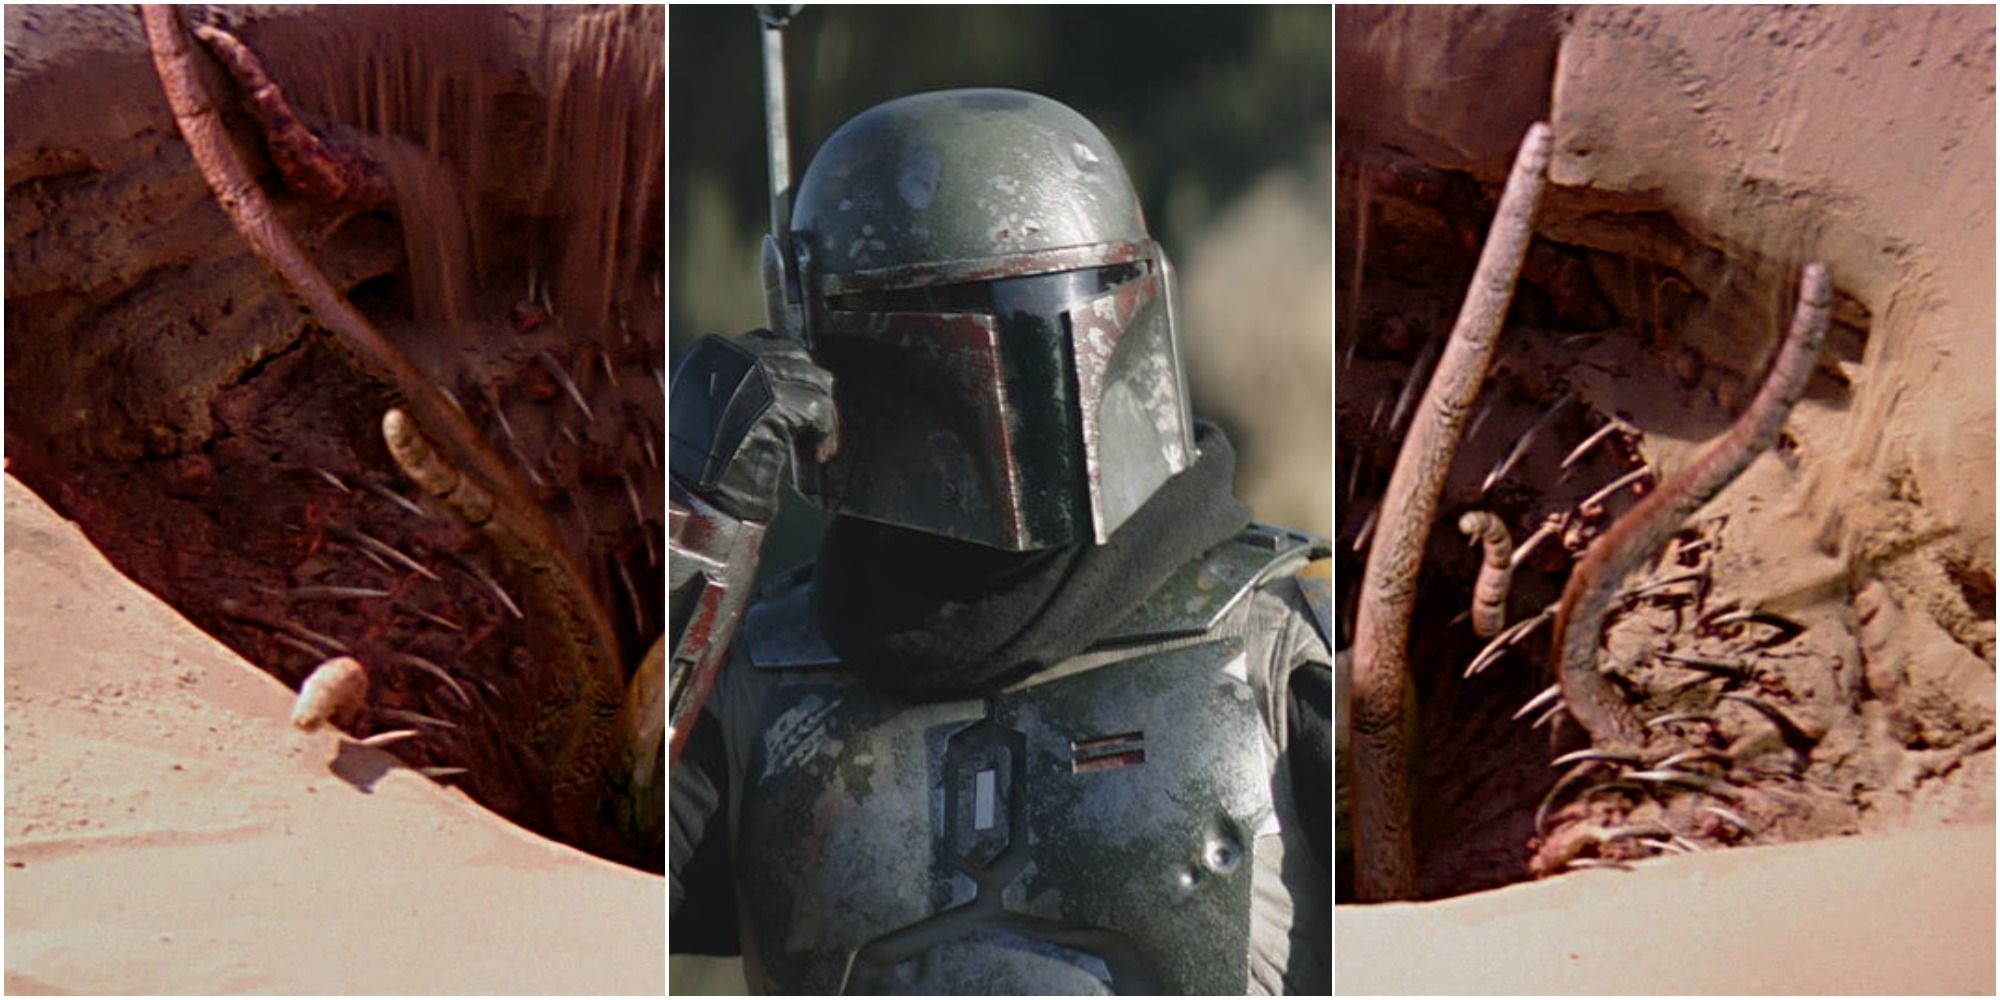 Characters That Could Appear In The Book Of Boba Fett